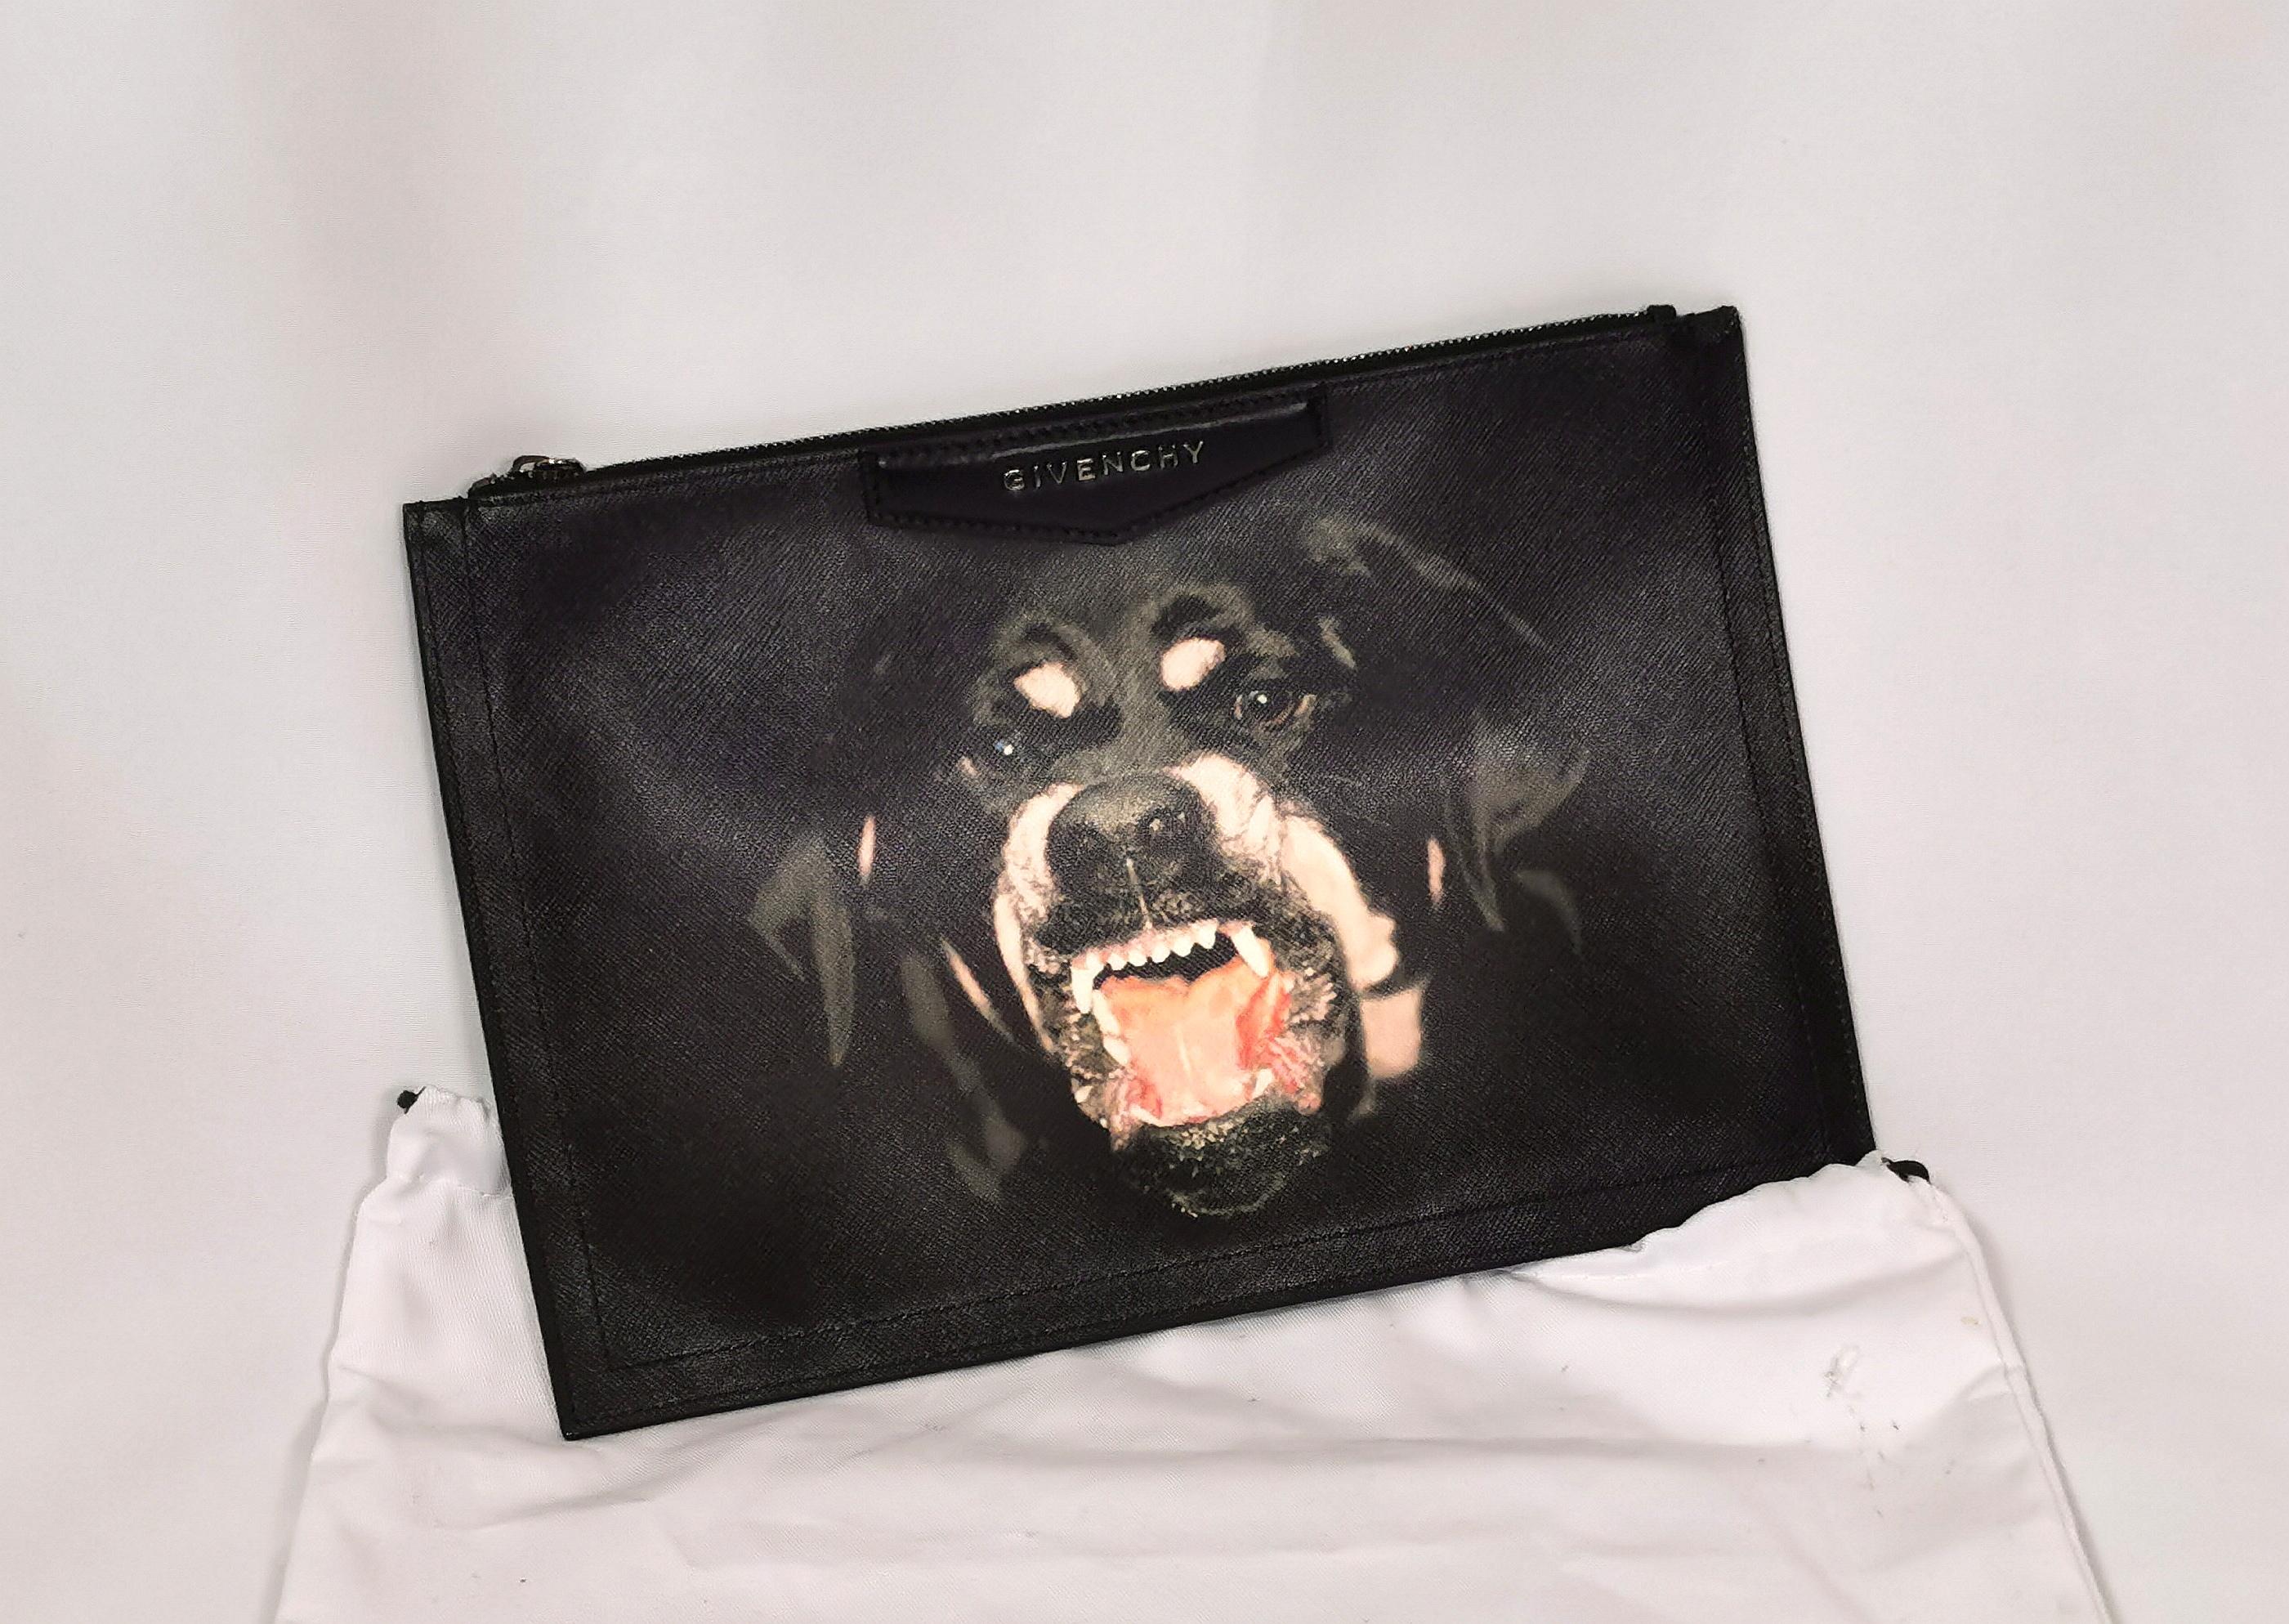 A gorgeous and iconic Givenchy Antigona rottweiler clutch bag.

This is the larger style clutch bag in textured printed leather with the iconic Givenchy rottweiler image.

It has a chunky metal and leather zipper fastening with a black cloth